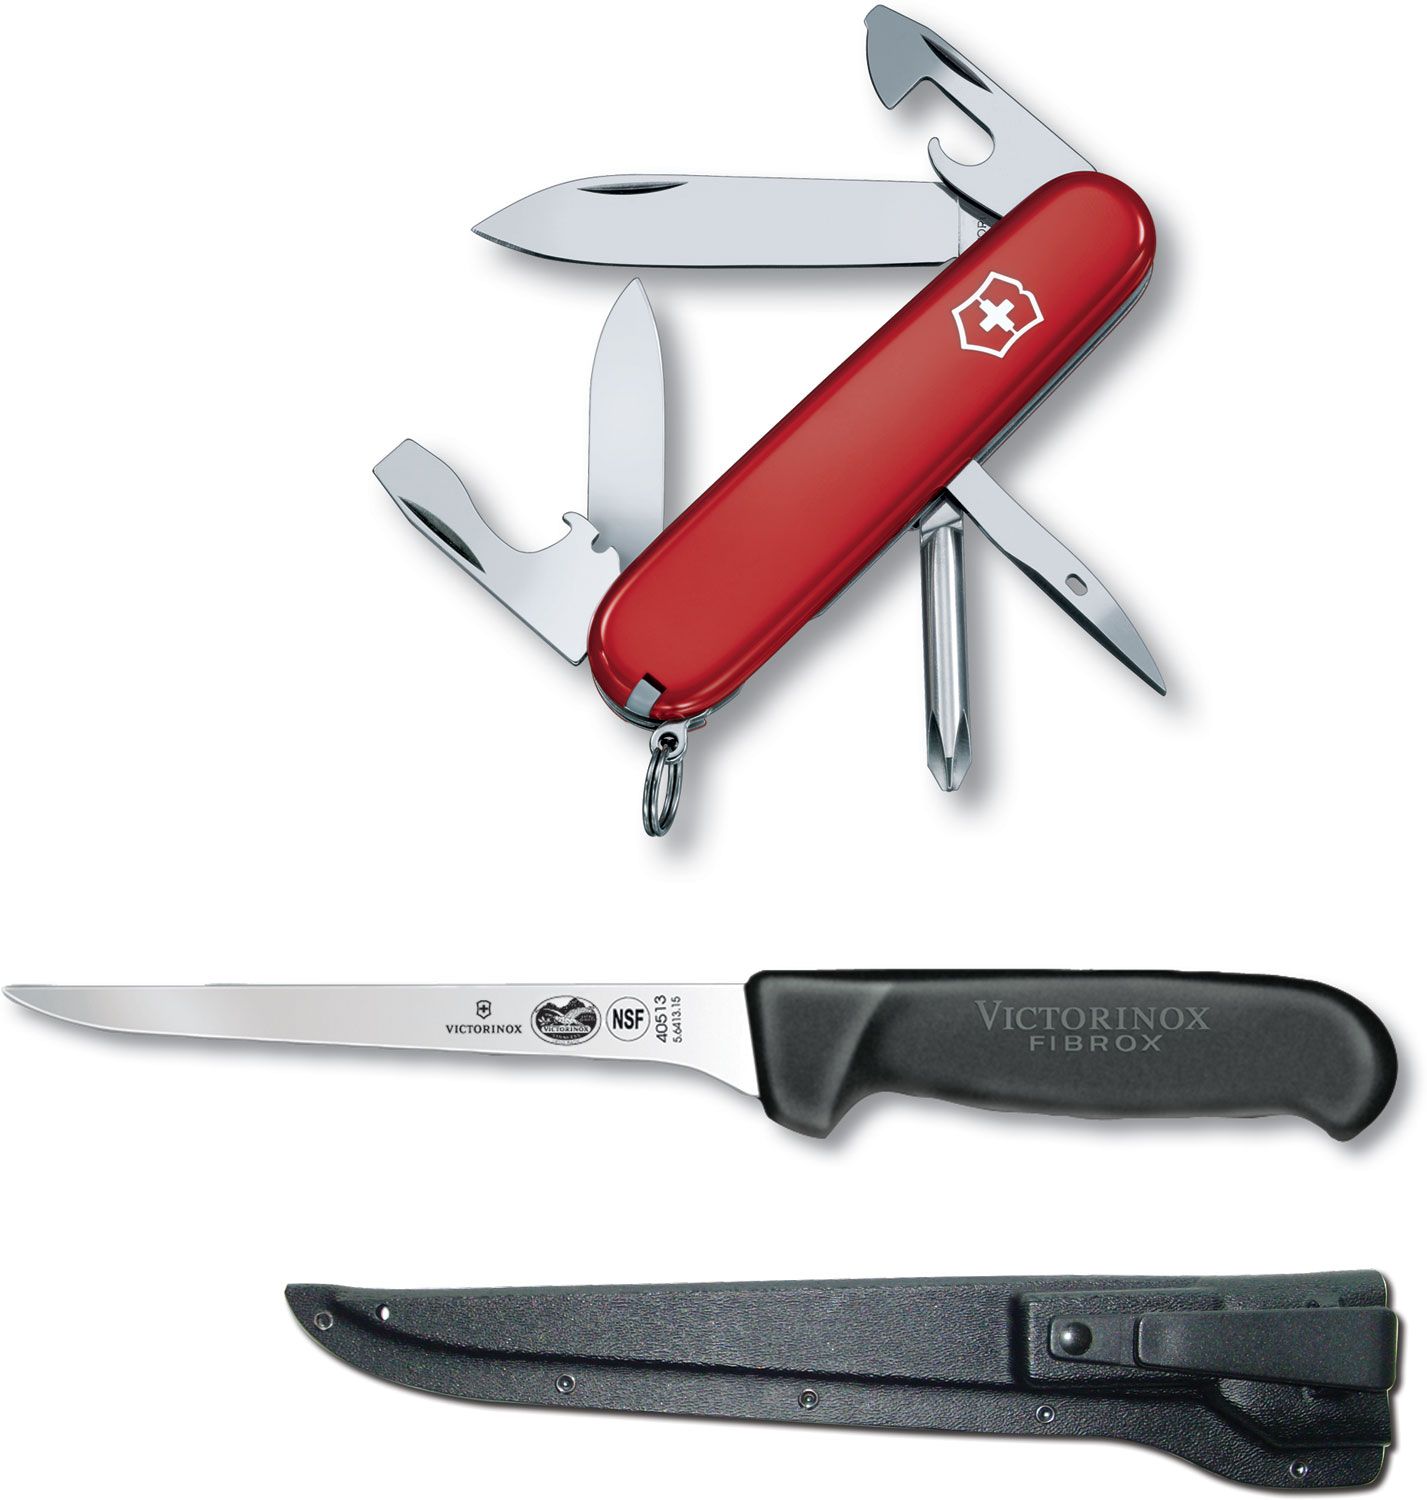 Victorinox Swiss Army Tinker Multi-Tool and 6 Fillet Knife Combo